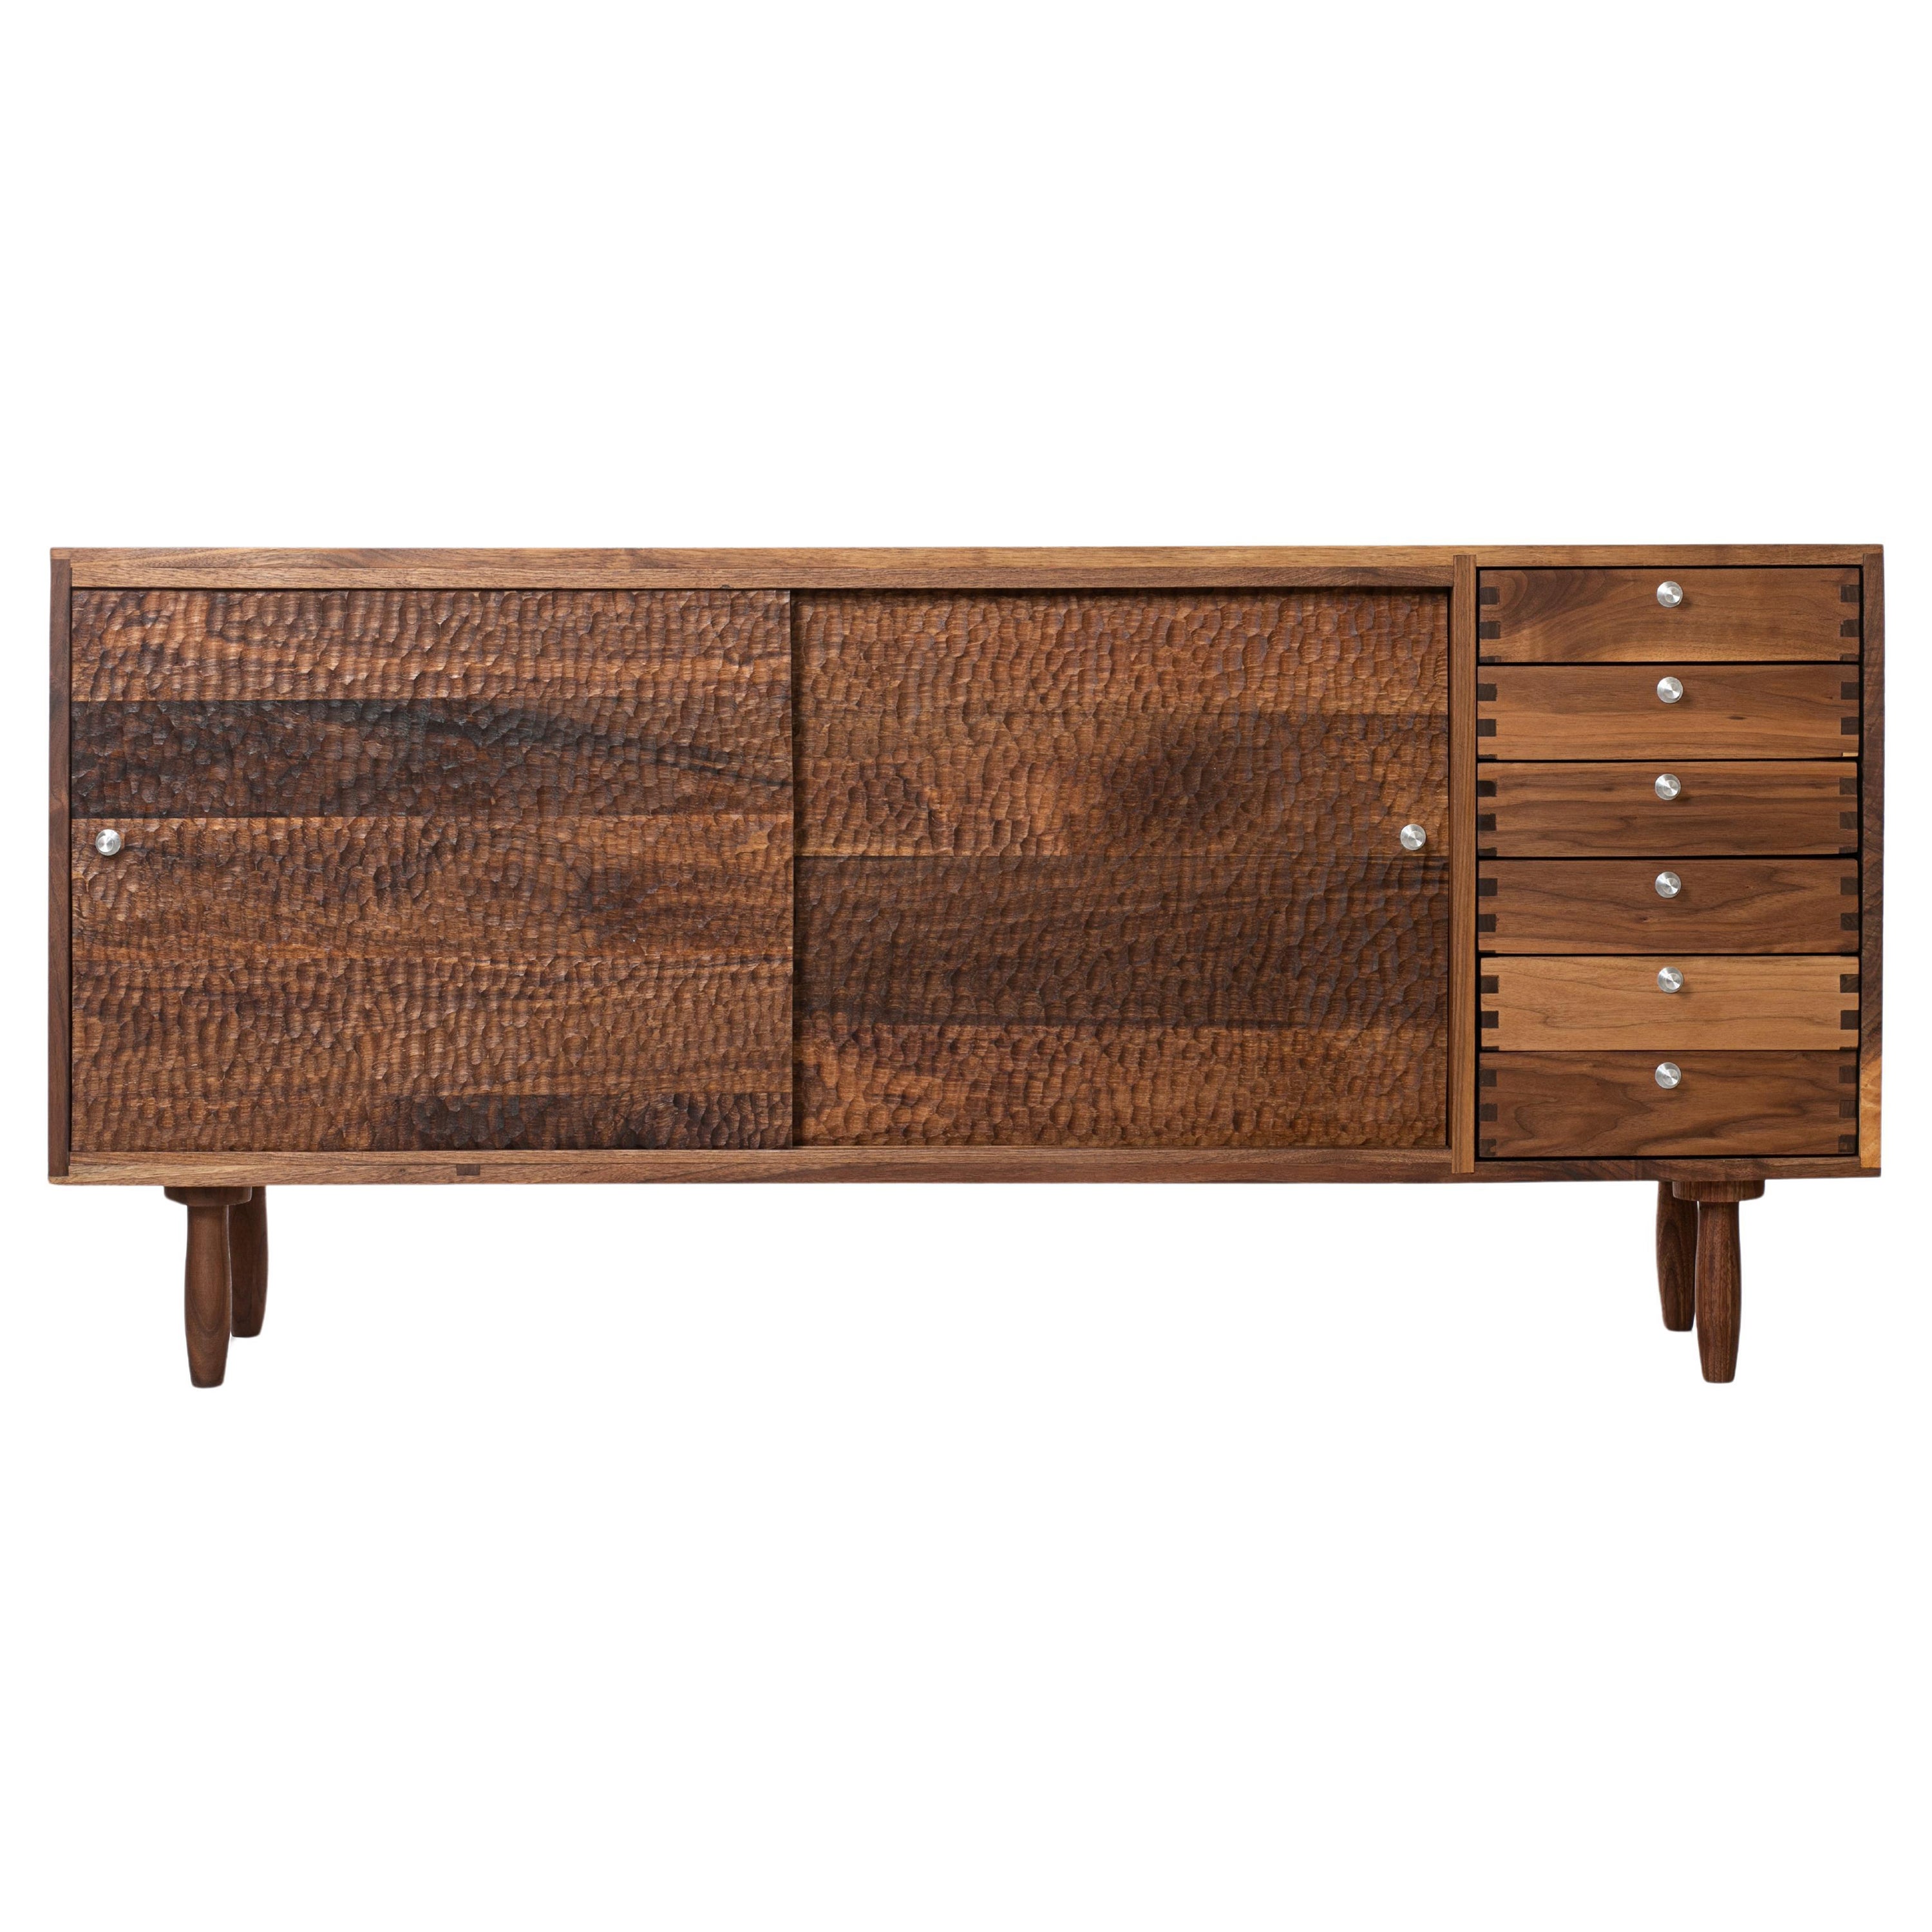 Chip carved walnut cabinet sideboard with sliding doors by Michael Rozell - new 